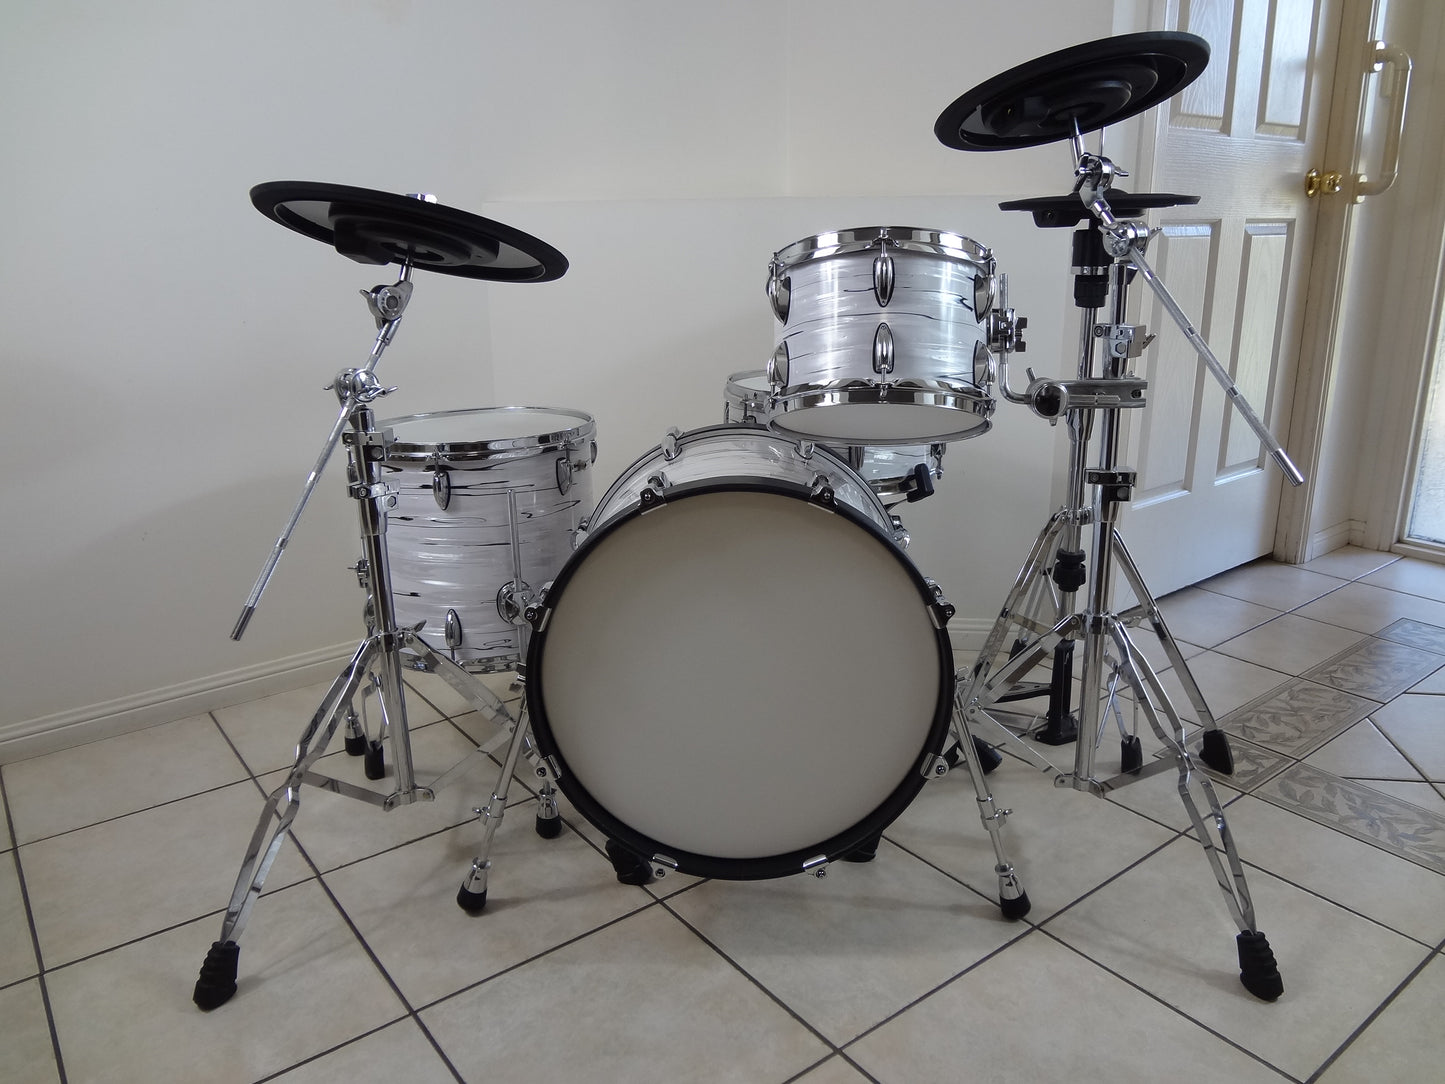 4 PIECE CUSTOM BUILT ELECTRONIC DRUM KIT (ELECTRONIC CYMBALS AND HARDWARE INCLUDED)